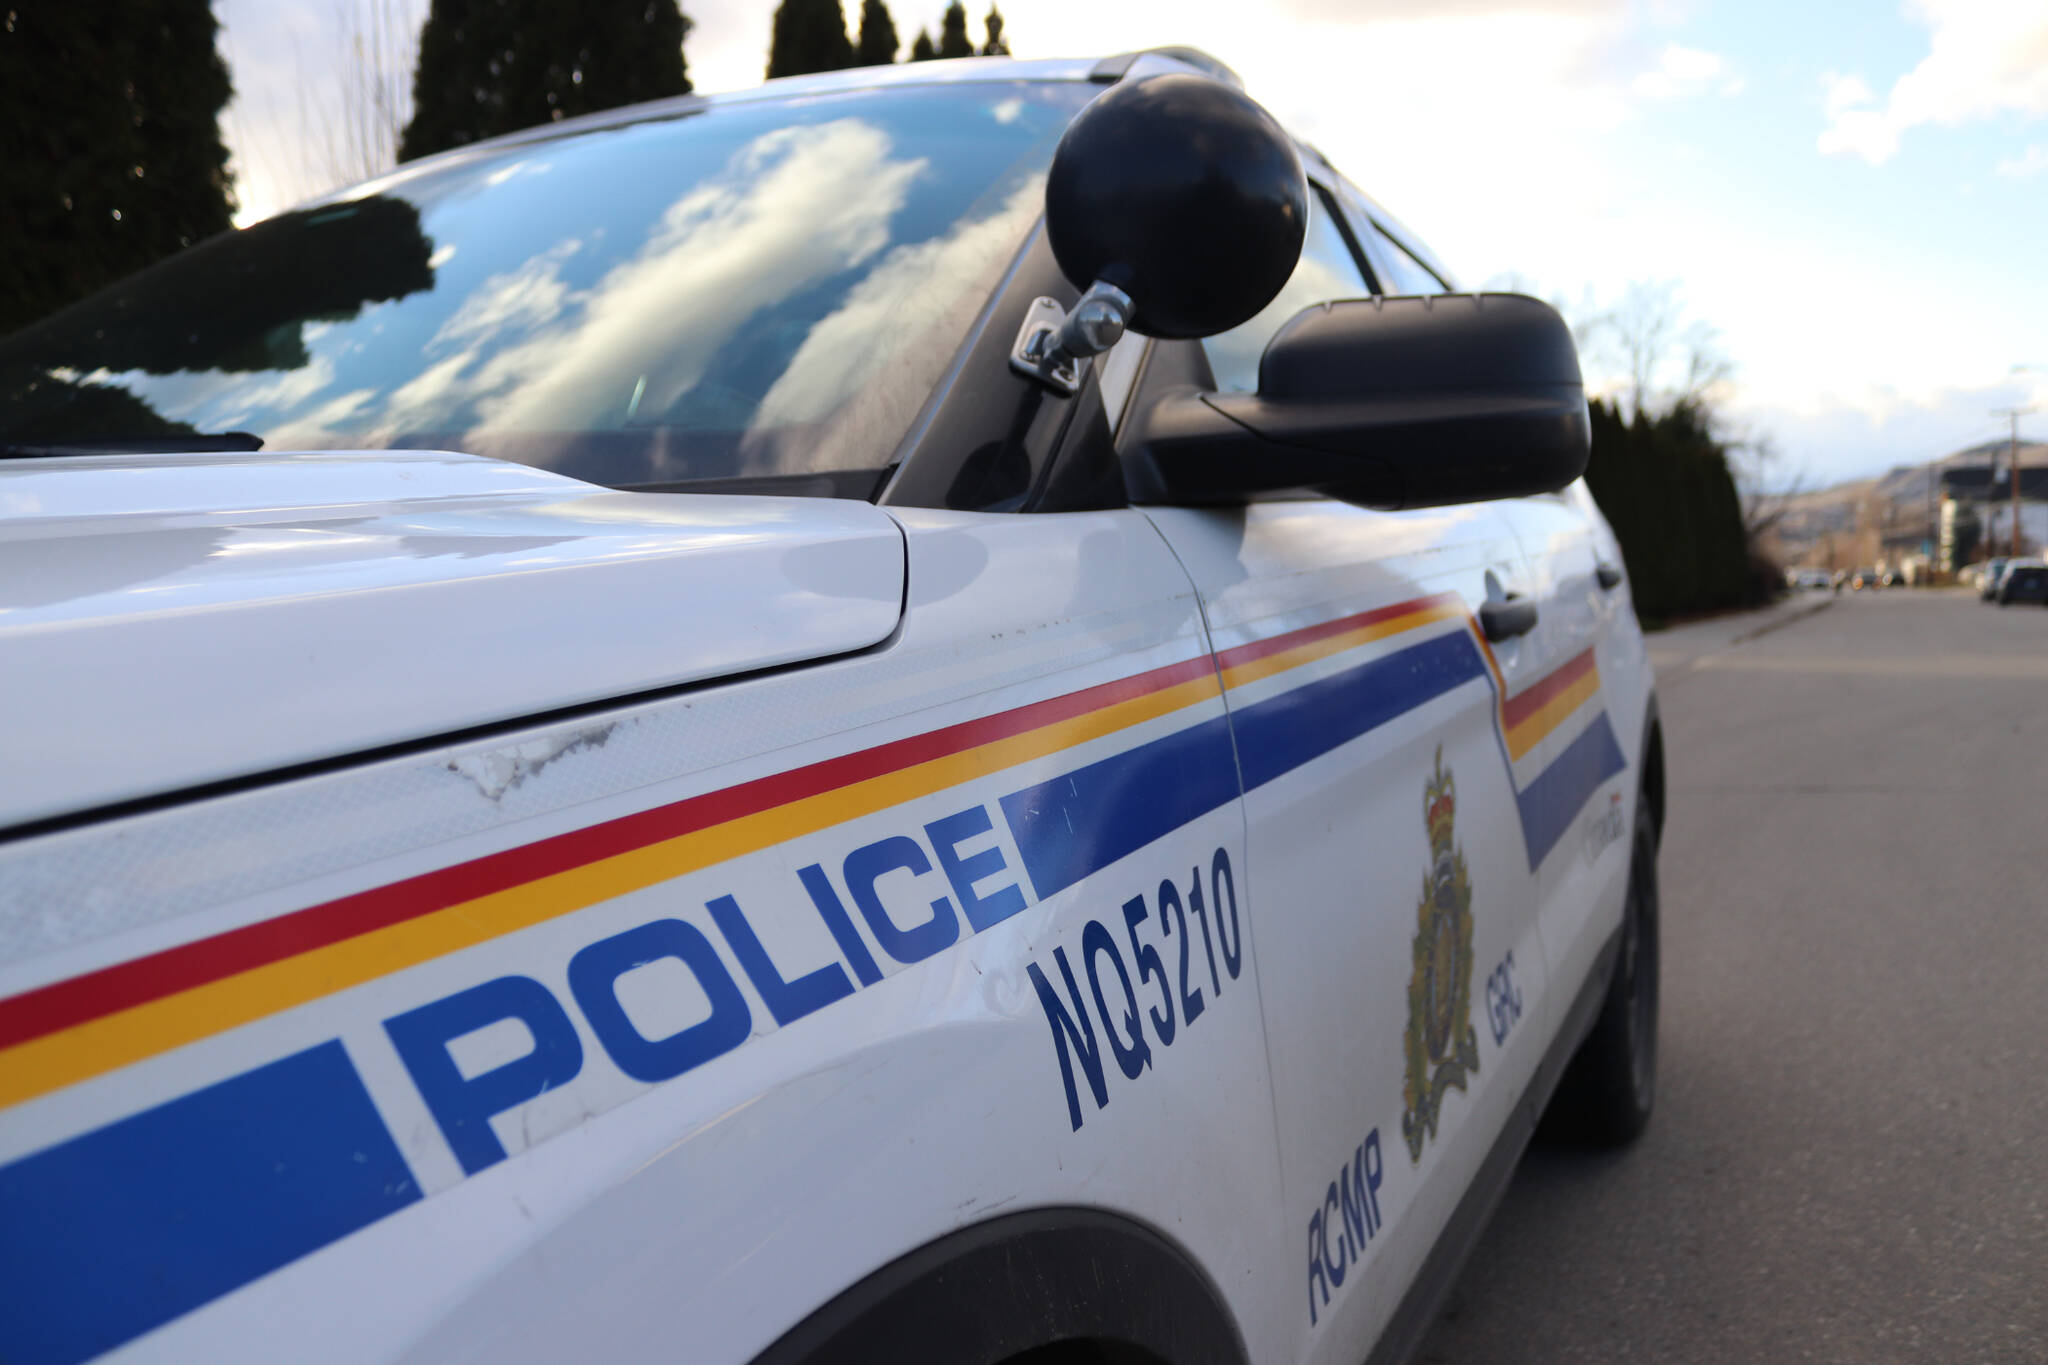 Police noticed a stolen licence plate in Vernon Tuesday, Jan. 24, 2023, which led them to busting a local drug trafficker. (Brendan Shykora - Morning Star)